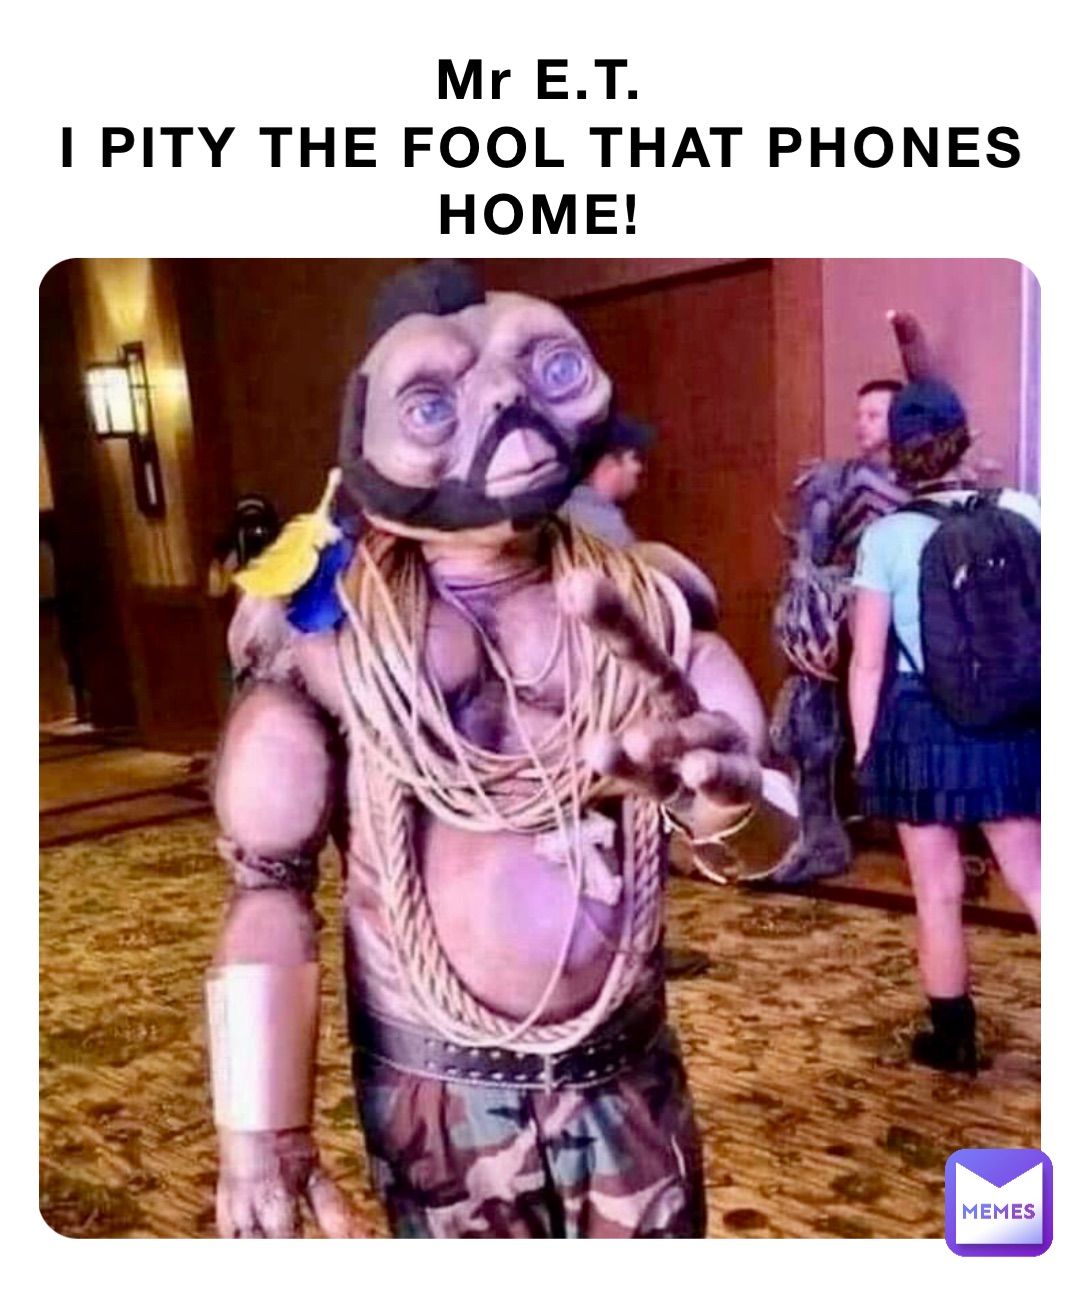 Mr E.T.
I PITY THE FOOL THAT PHONES HOME!